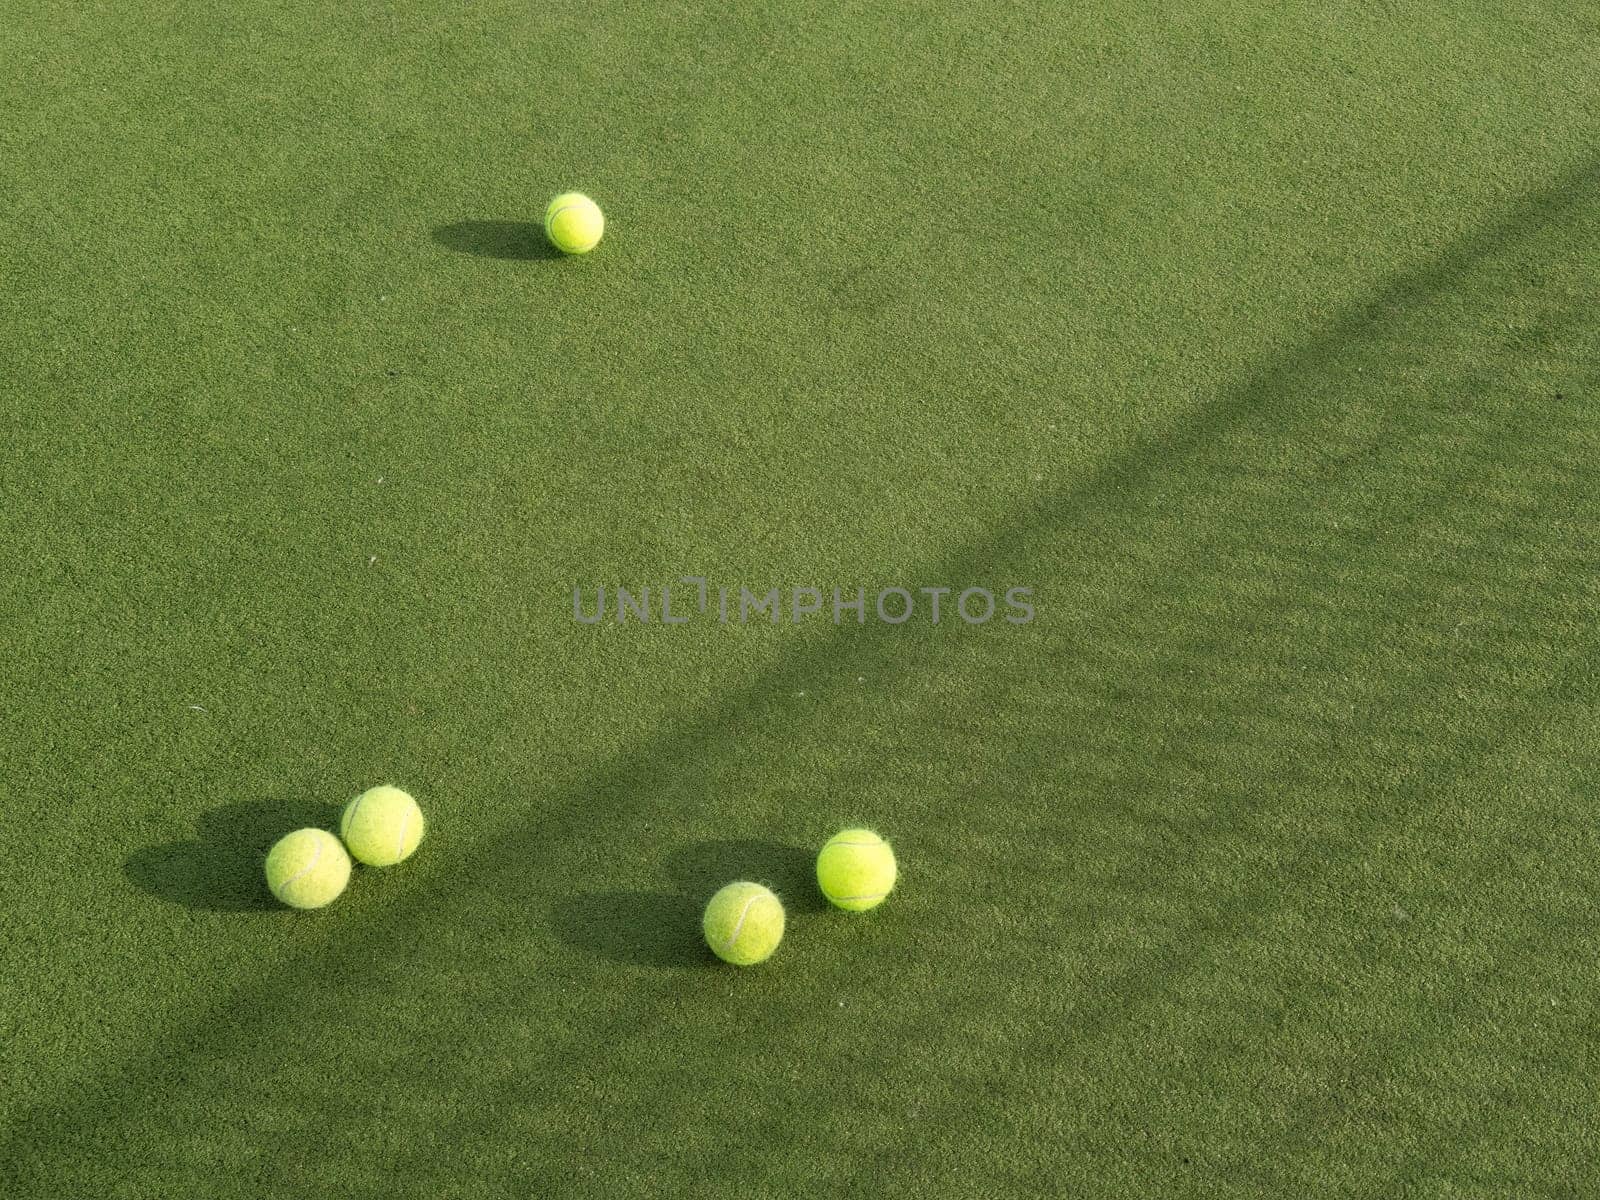 Tennis balls are on green grass by Andelov13